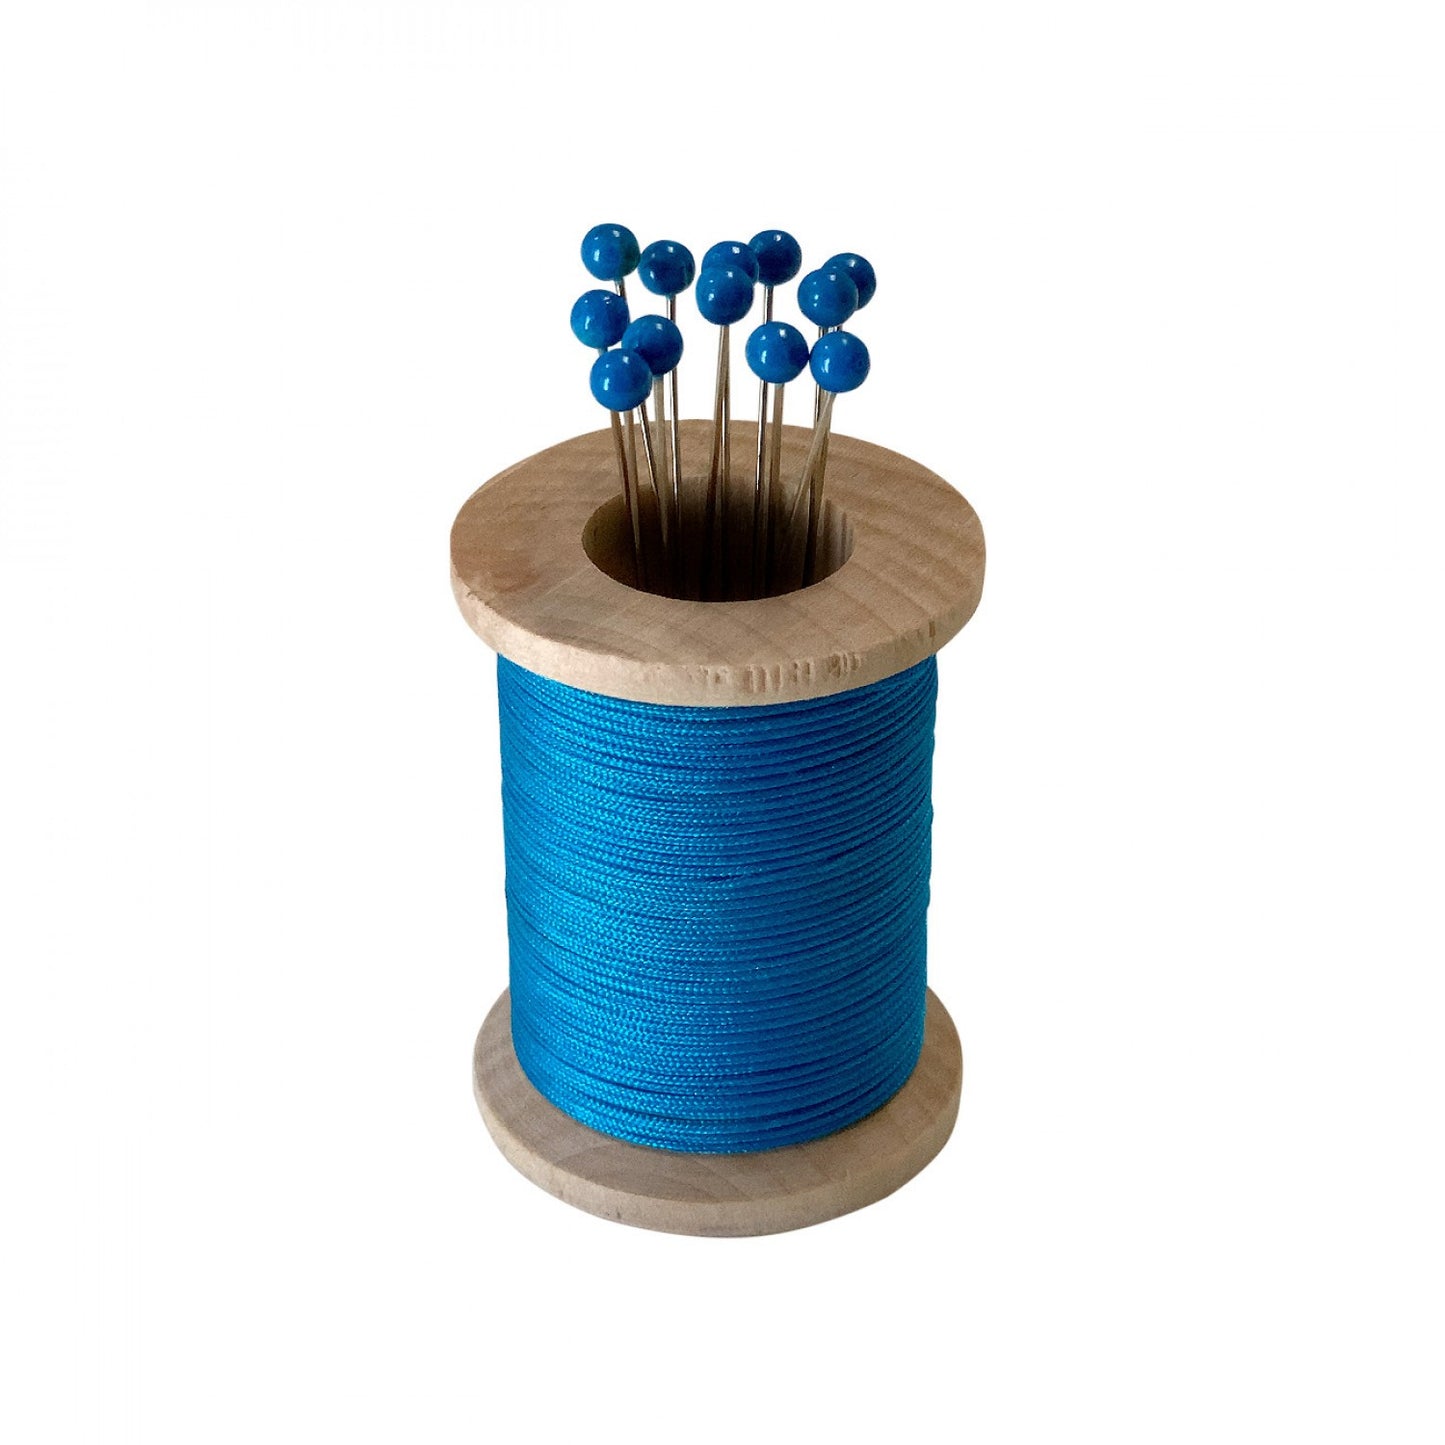 Magnetic Spool Pin Holders, Multiple Colors